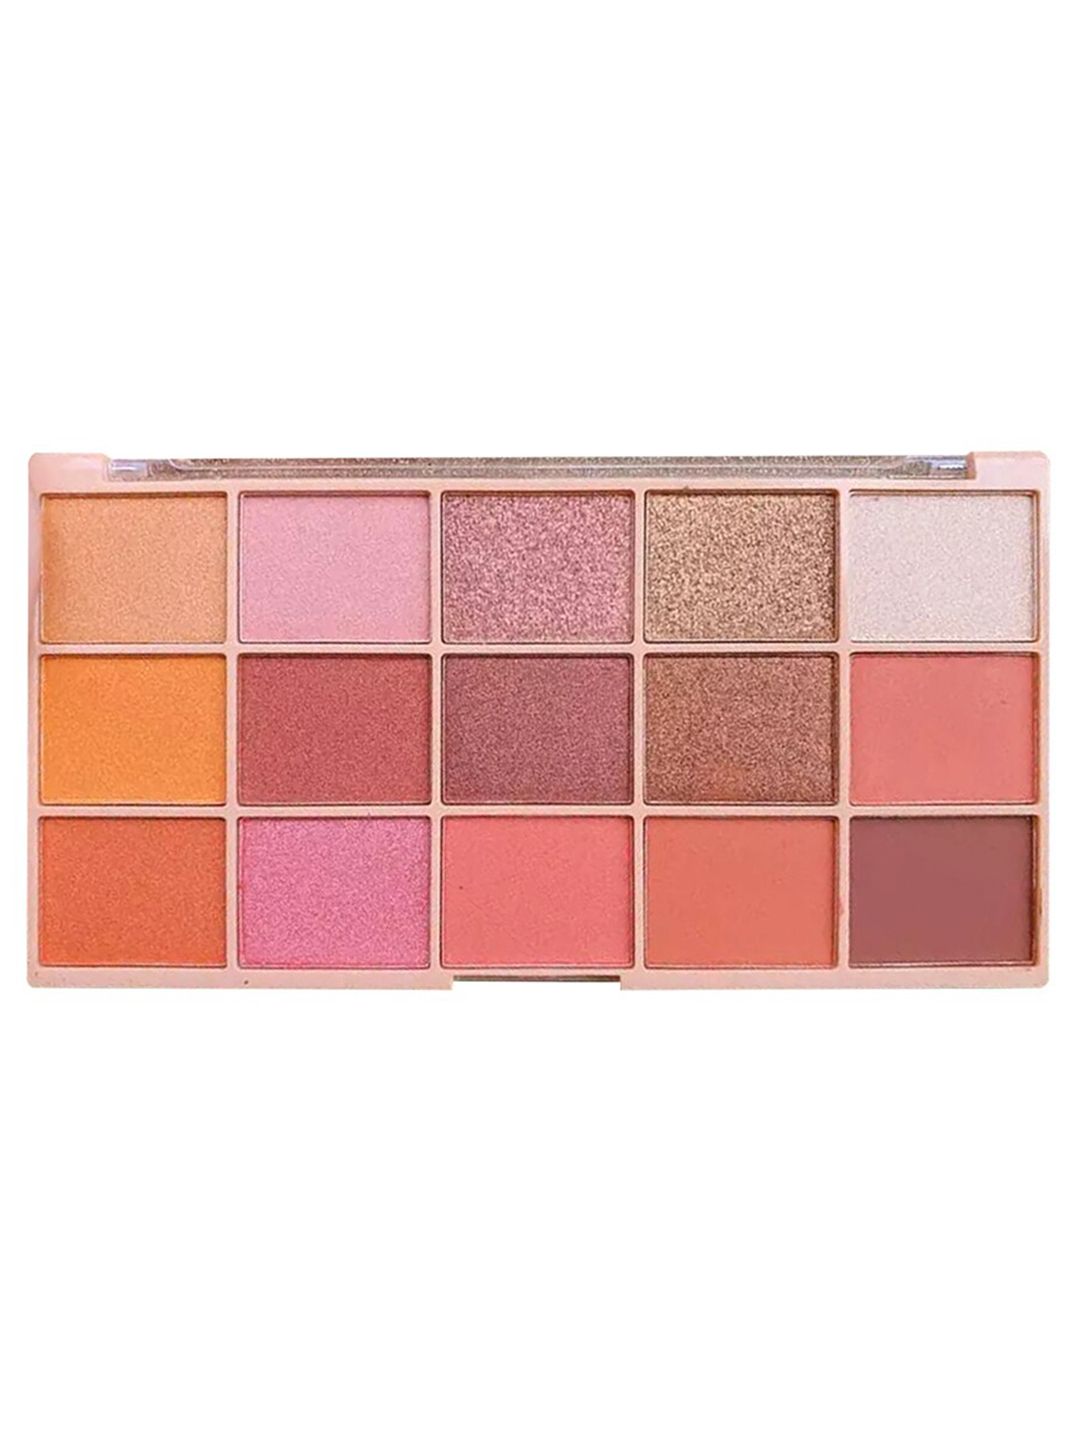 Sivanna Colors Ultra Professional Luxuriant Eye Shadow Palette - HF3011 02 Price in India